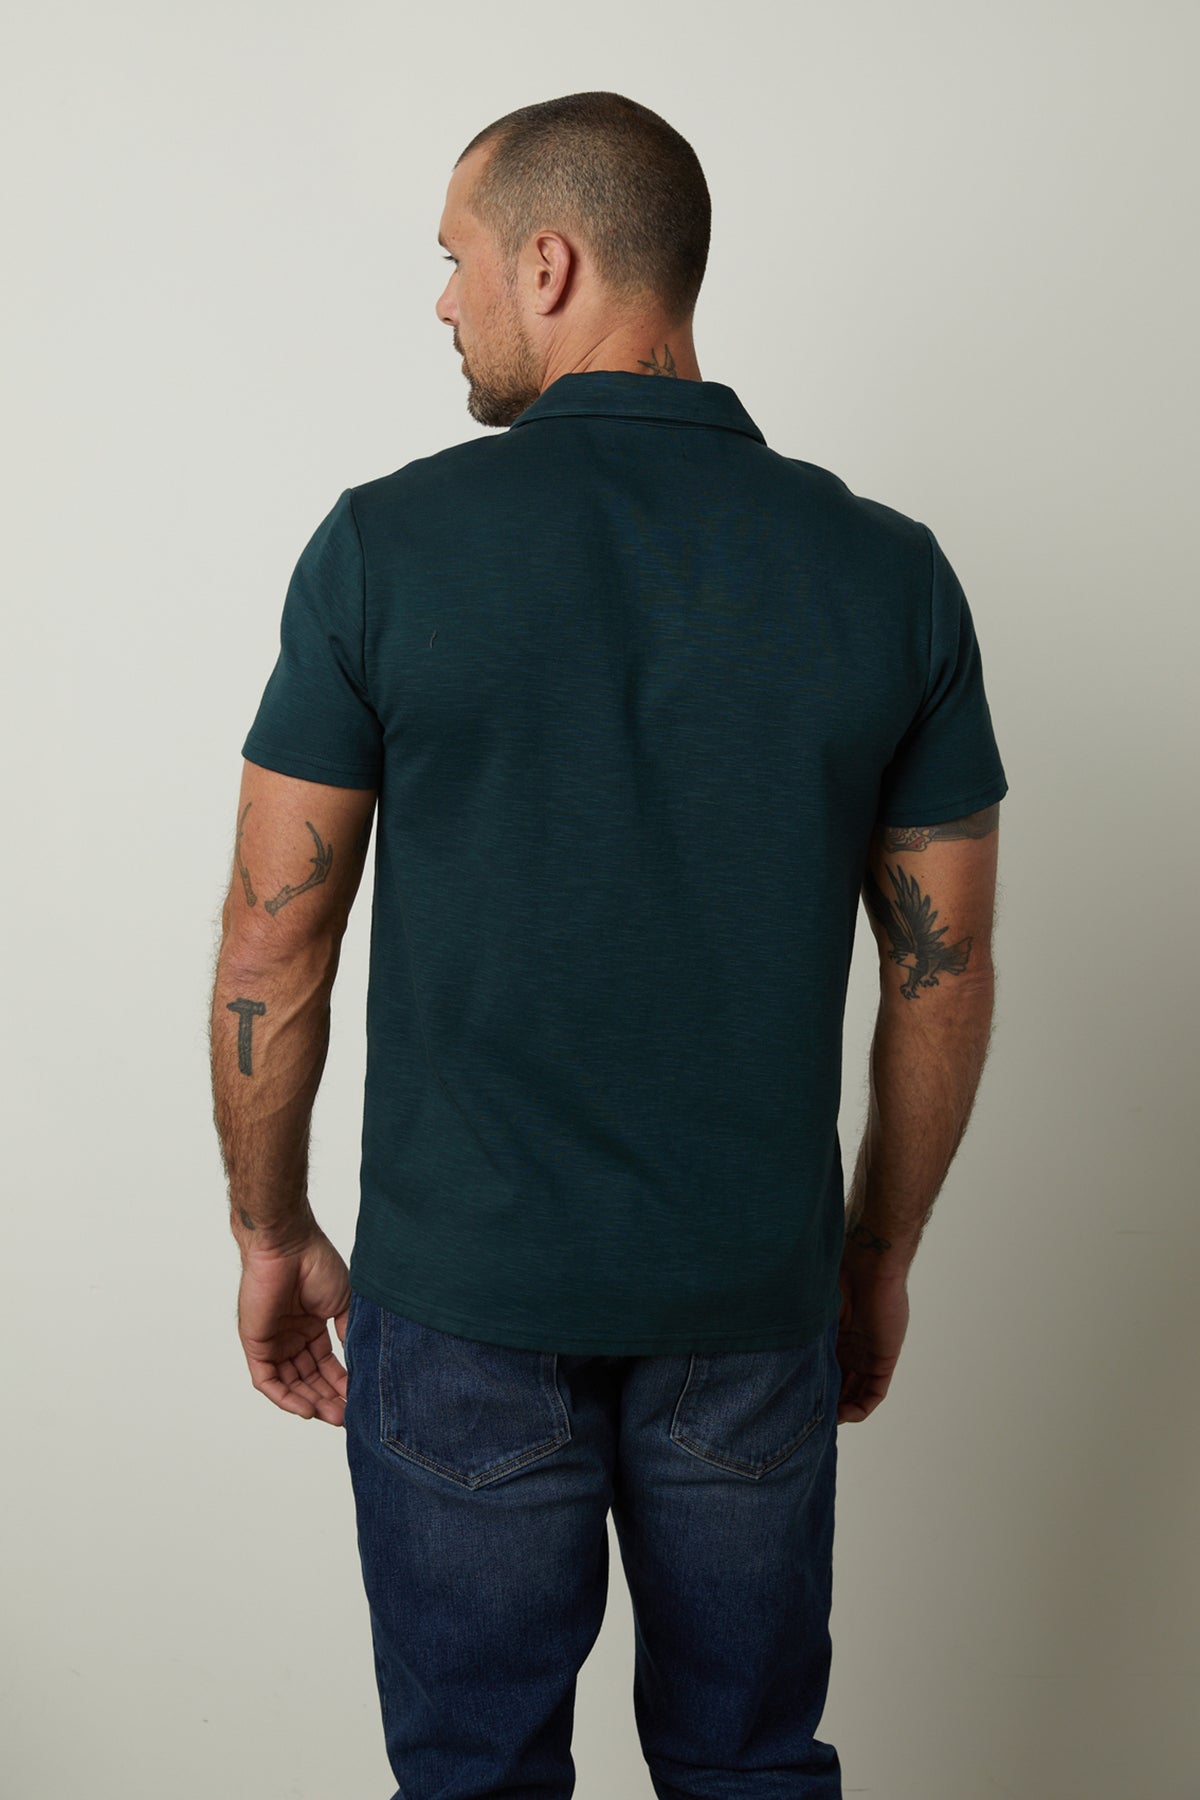   The back view of a man wearing a Velvet by Graham & Spencer DILAN COTTON BLEND POLO shirt. 